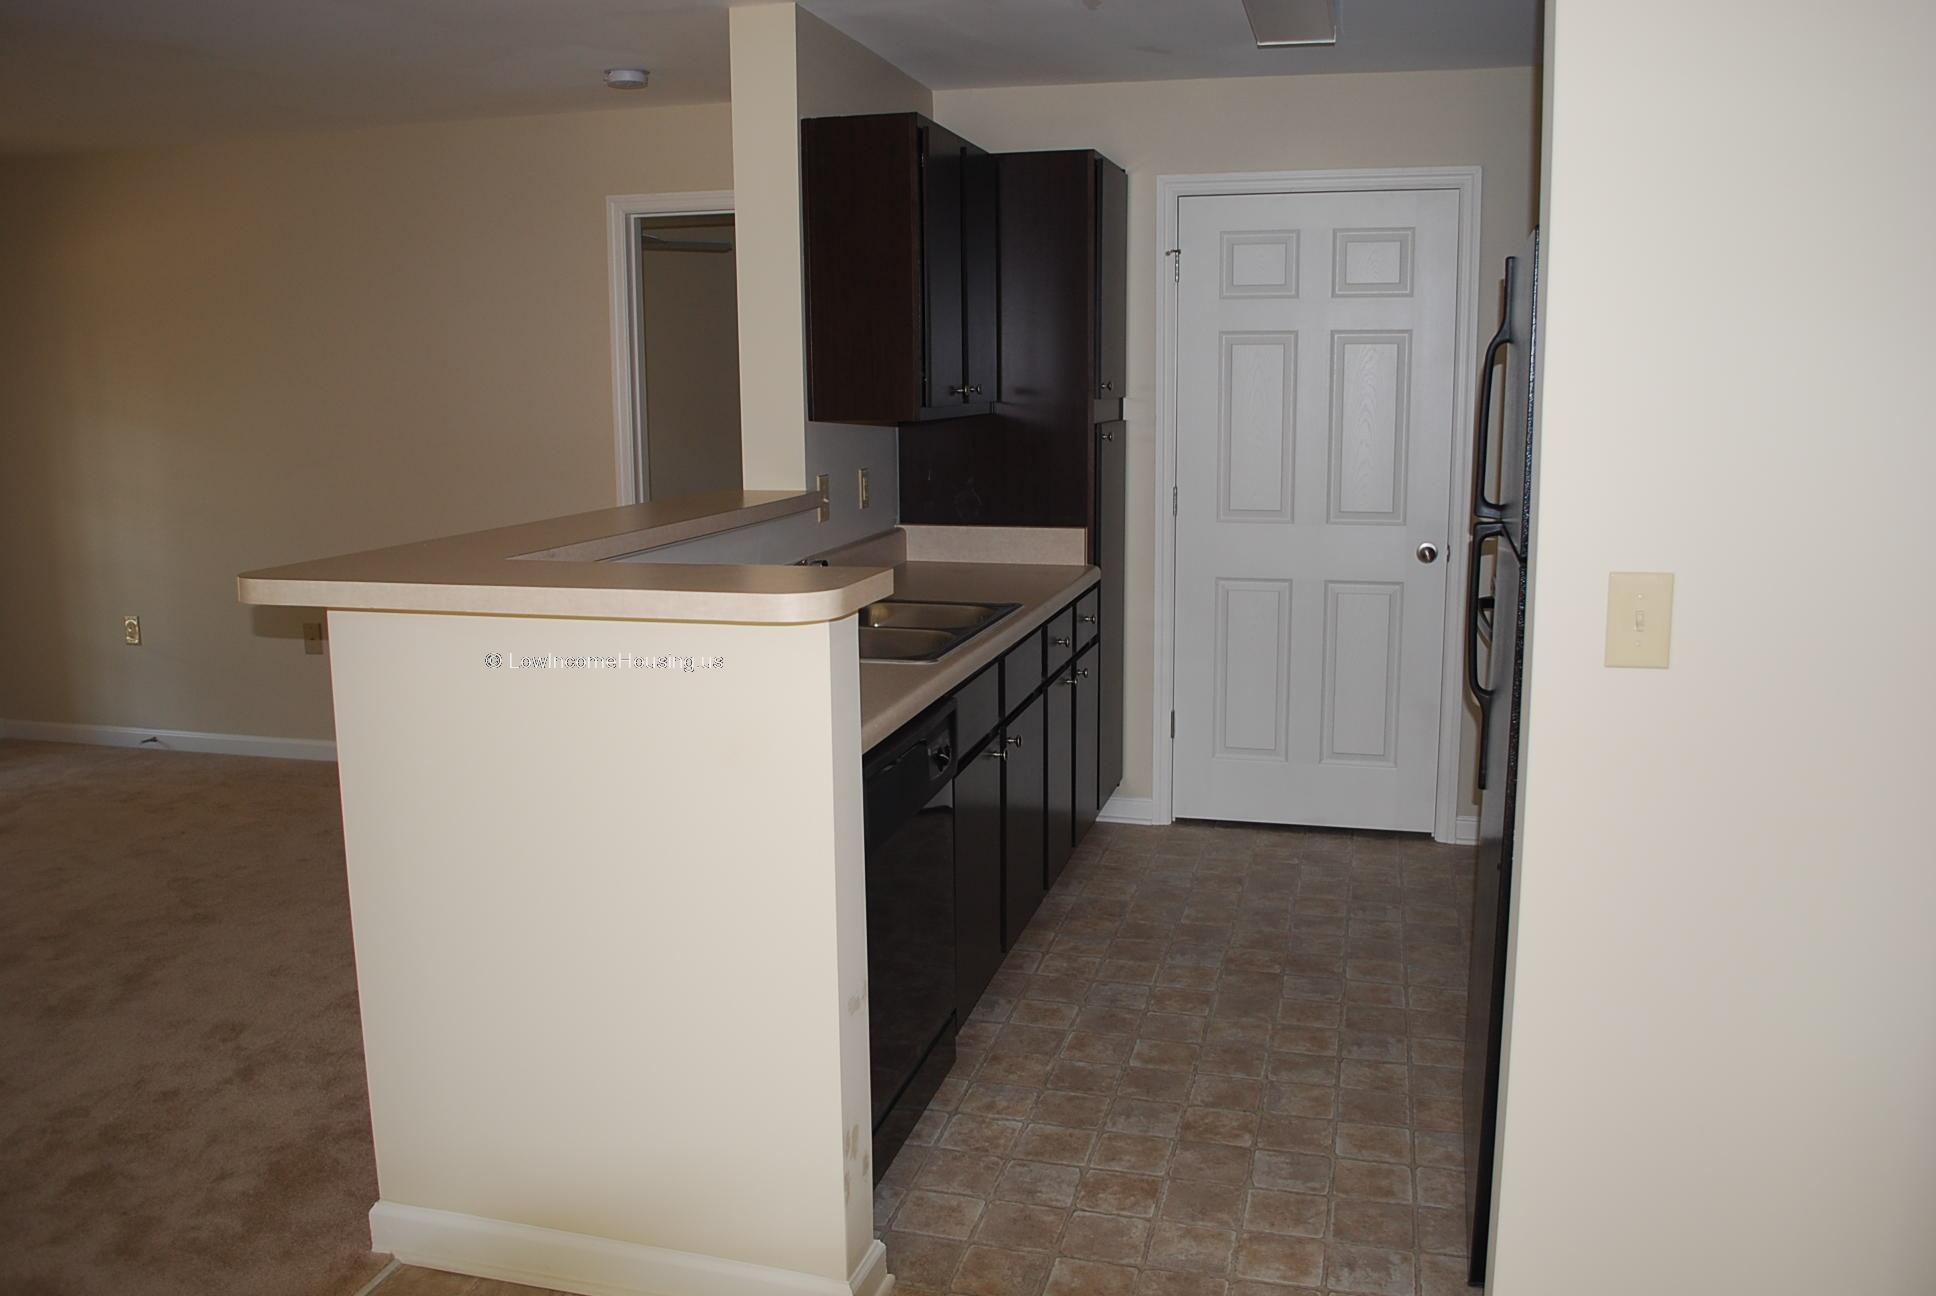 Interior view of dining area and kitchen with refrigerator and storage cabinet. 